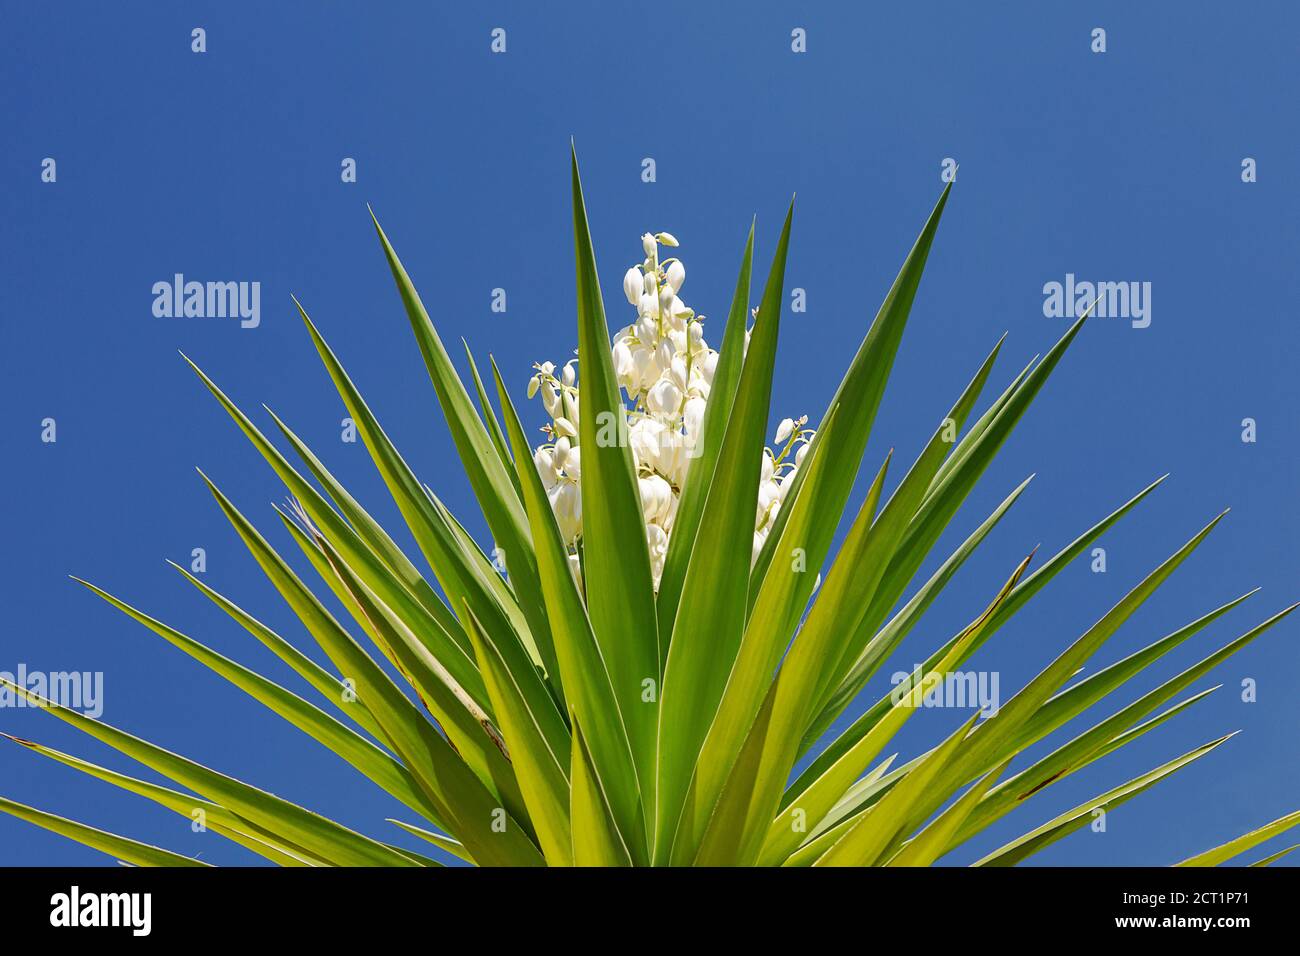 Artistic photograph of the top of a yucca tree when it is in flower against a bright blue sky Stock Photo